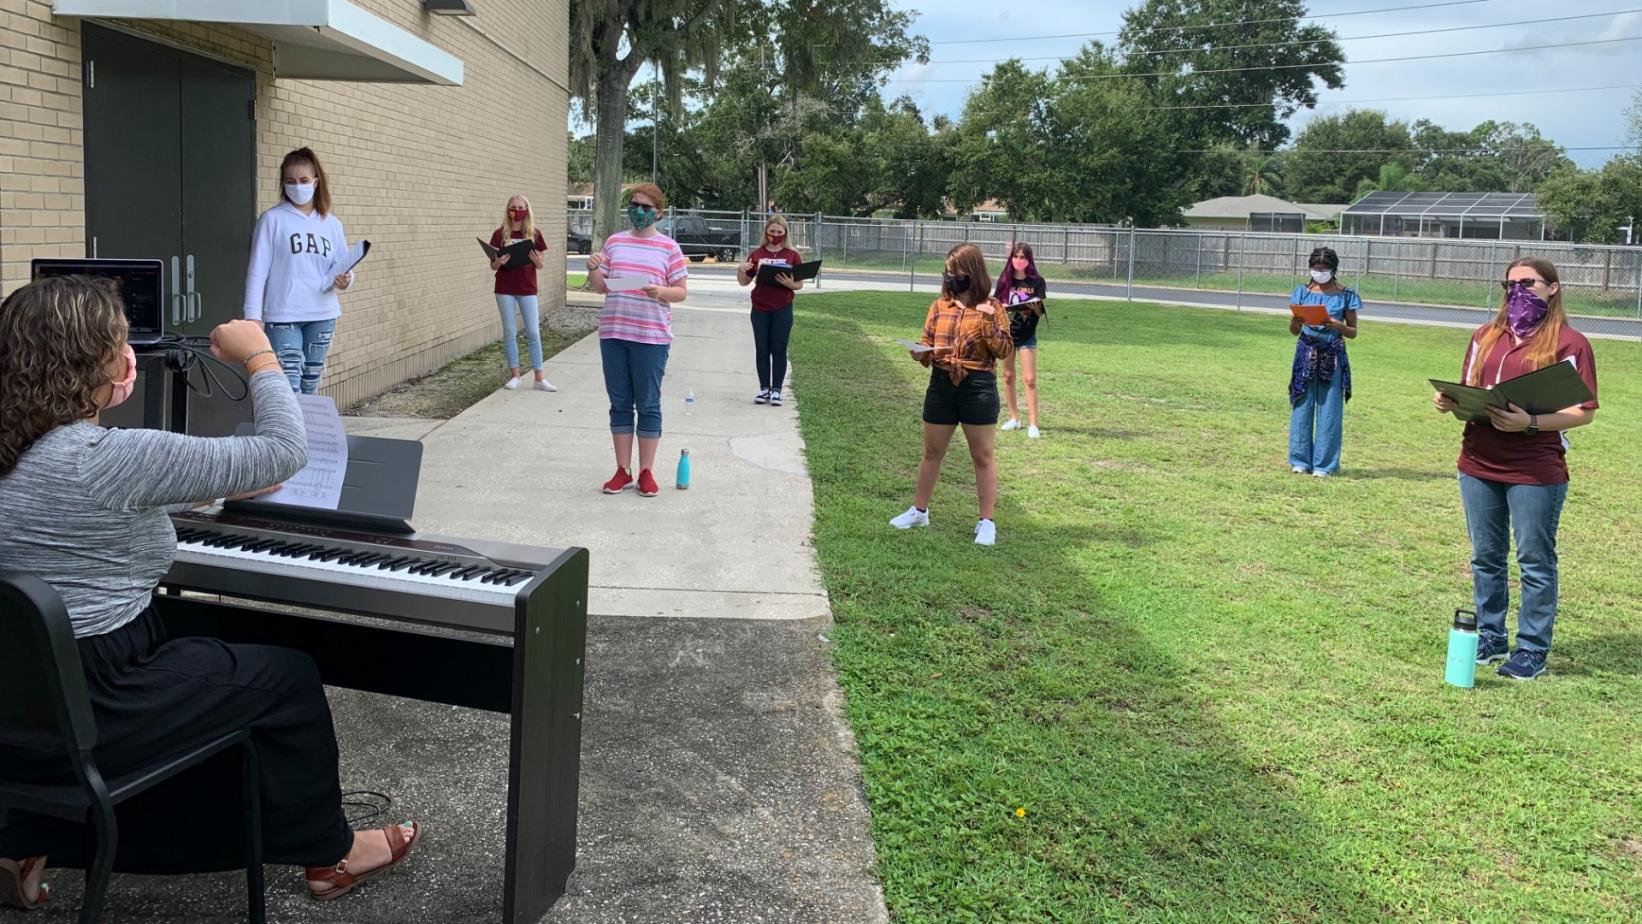 Chorus practices outdoors this year at countryside high school in Pinellas county, Florida.